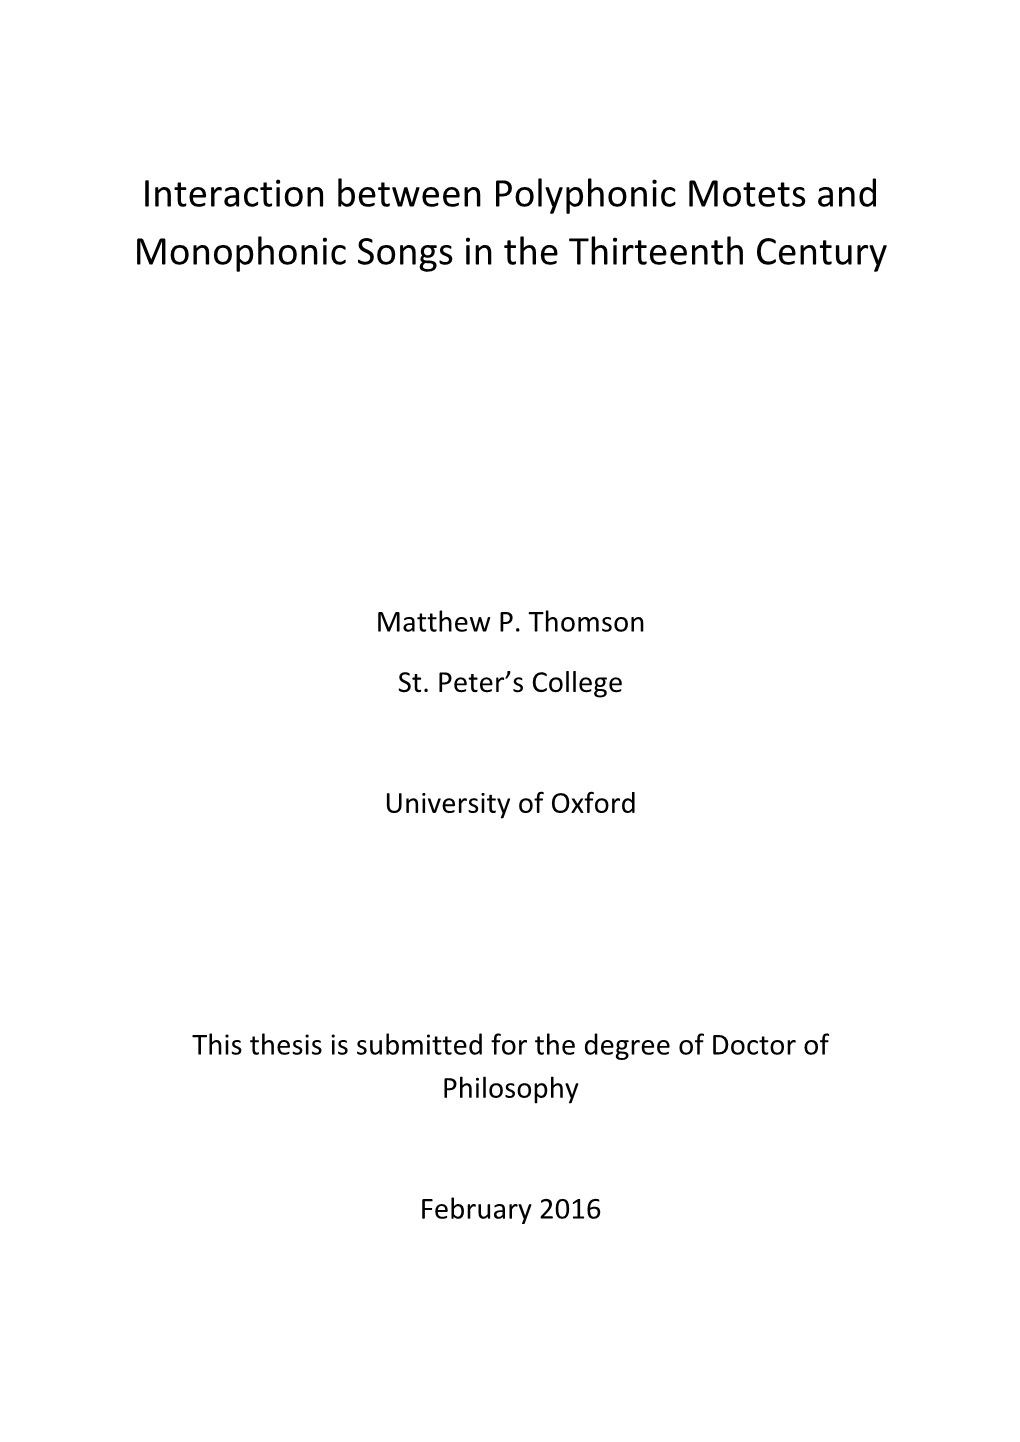 Interaction Between Polyphonic Motets and Monophonic Songs in the Thirteenth Century